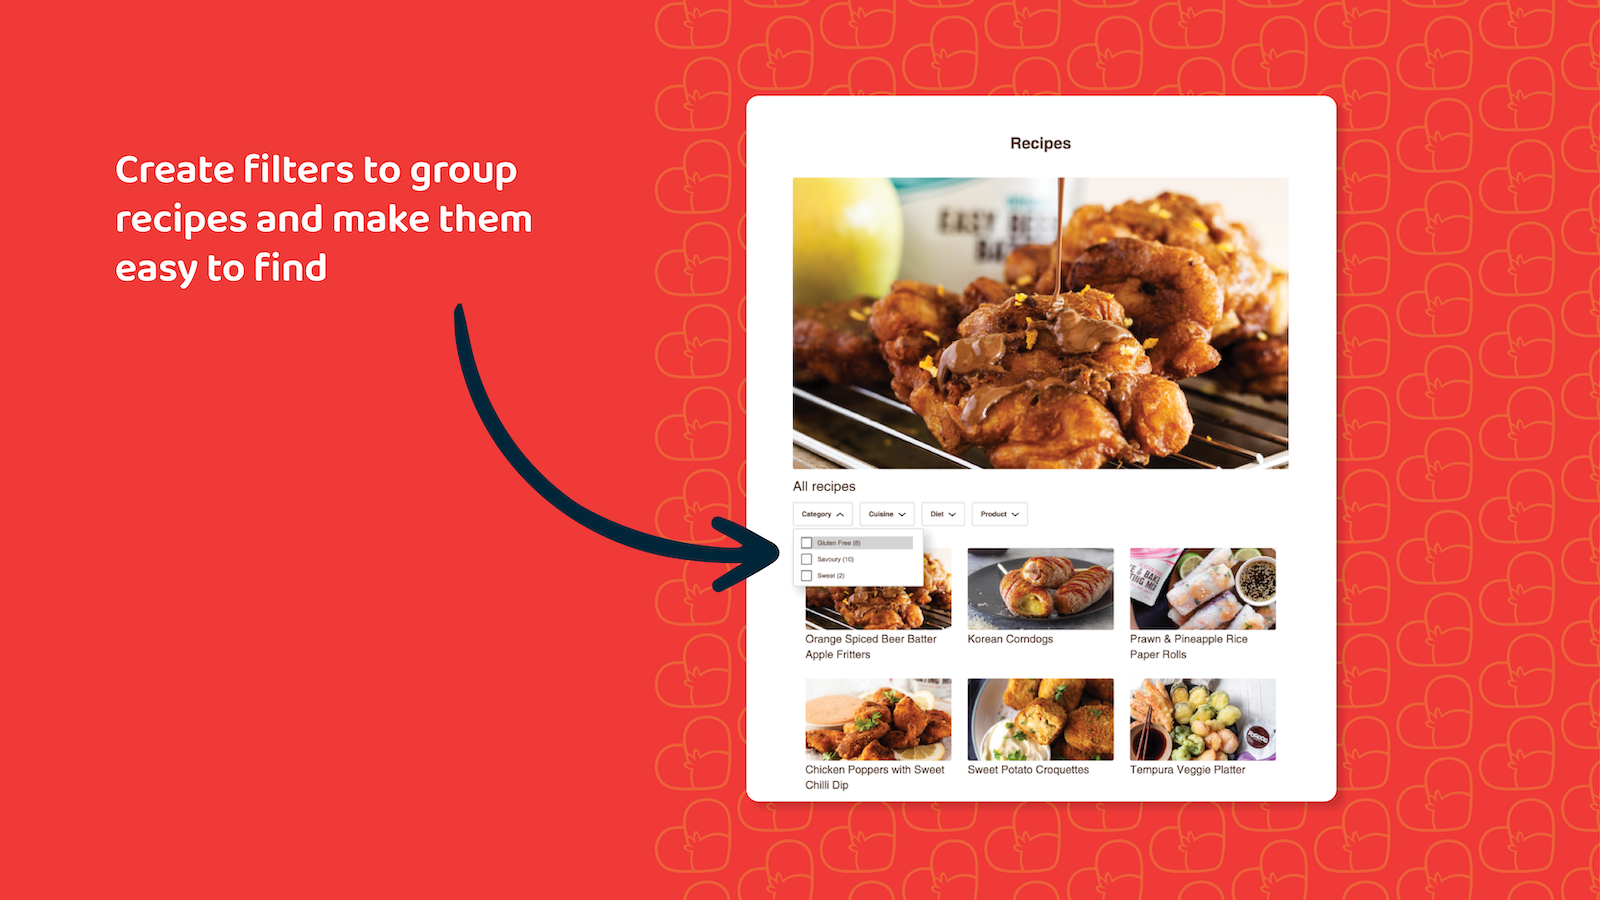 Group recipes using filters. You can create as many as you want